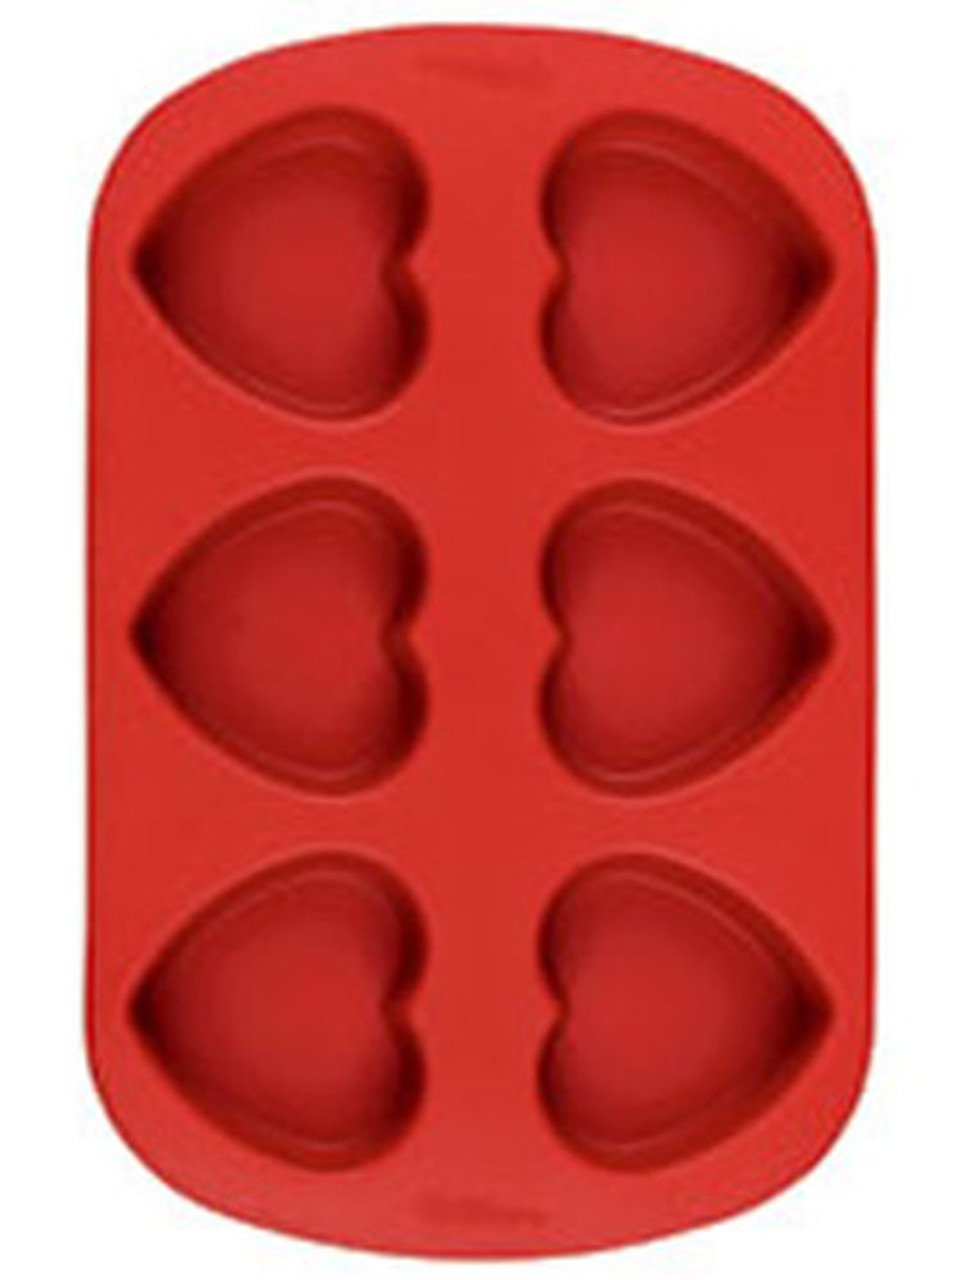 Wilton Mini Heart Silicone Red Valentines Day Mold 6 Cavities